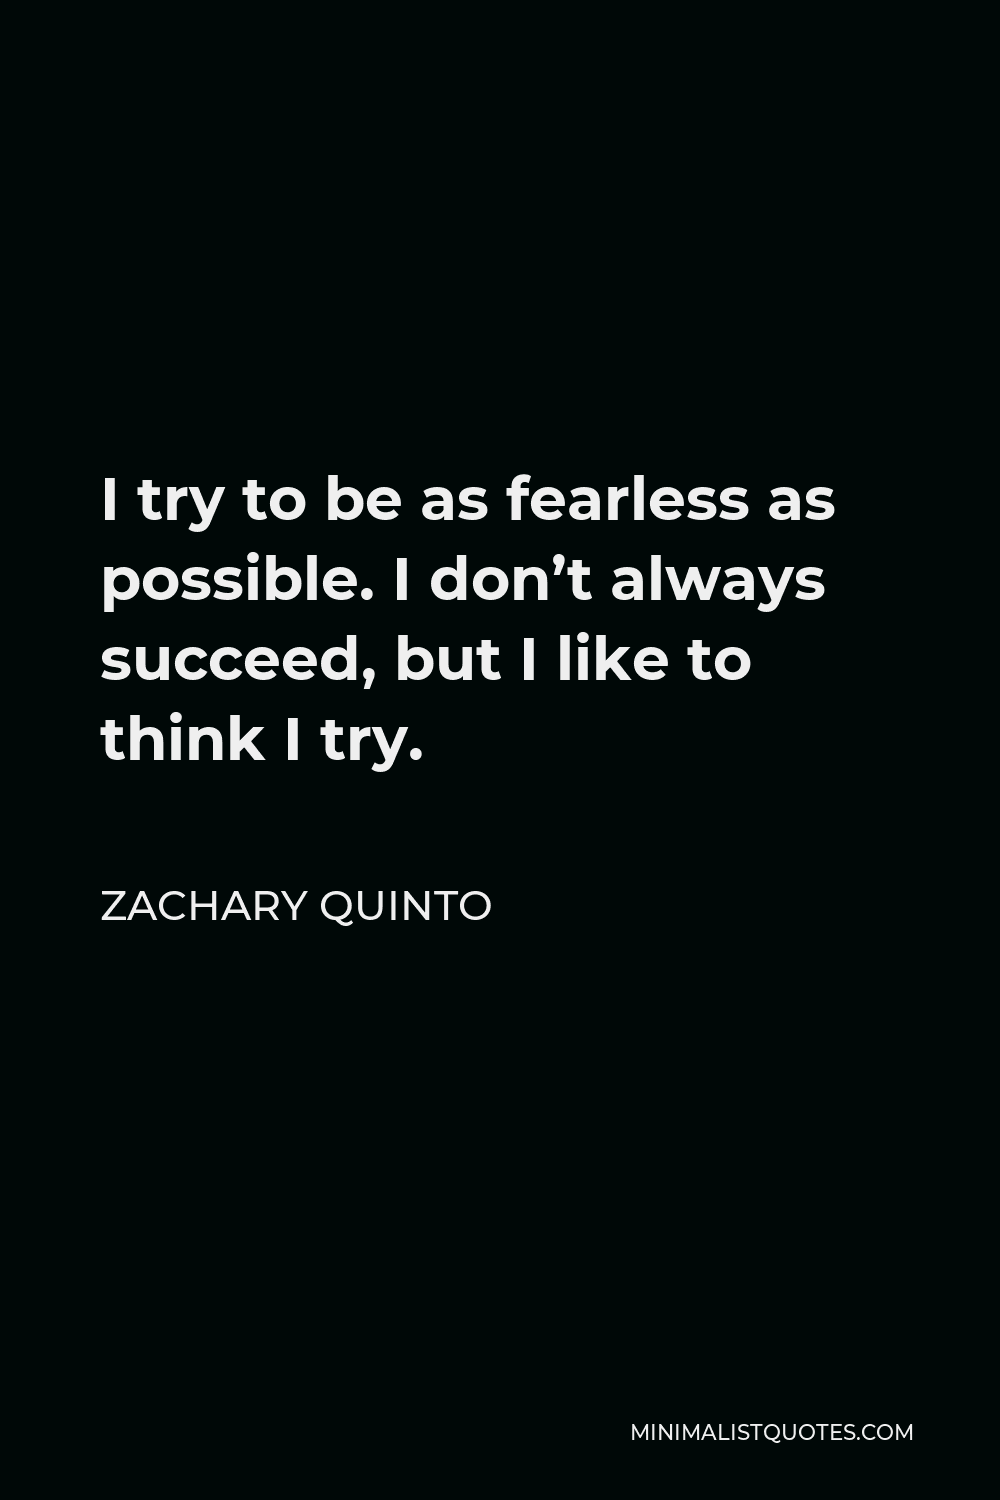 Zachary Quinto Quote - I try to be as fearless as possible. I don’t always succeed, but I like to think I try.